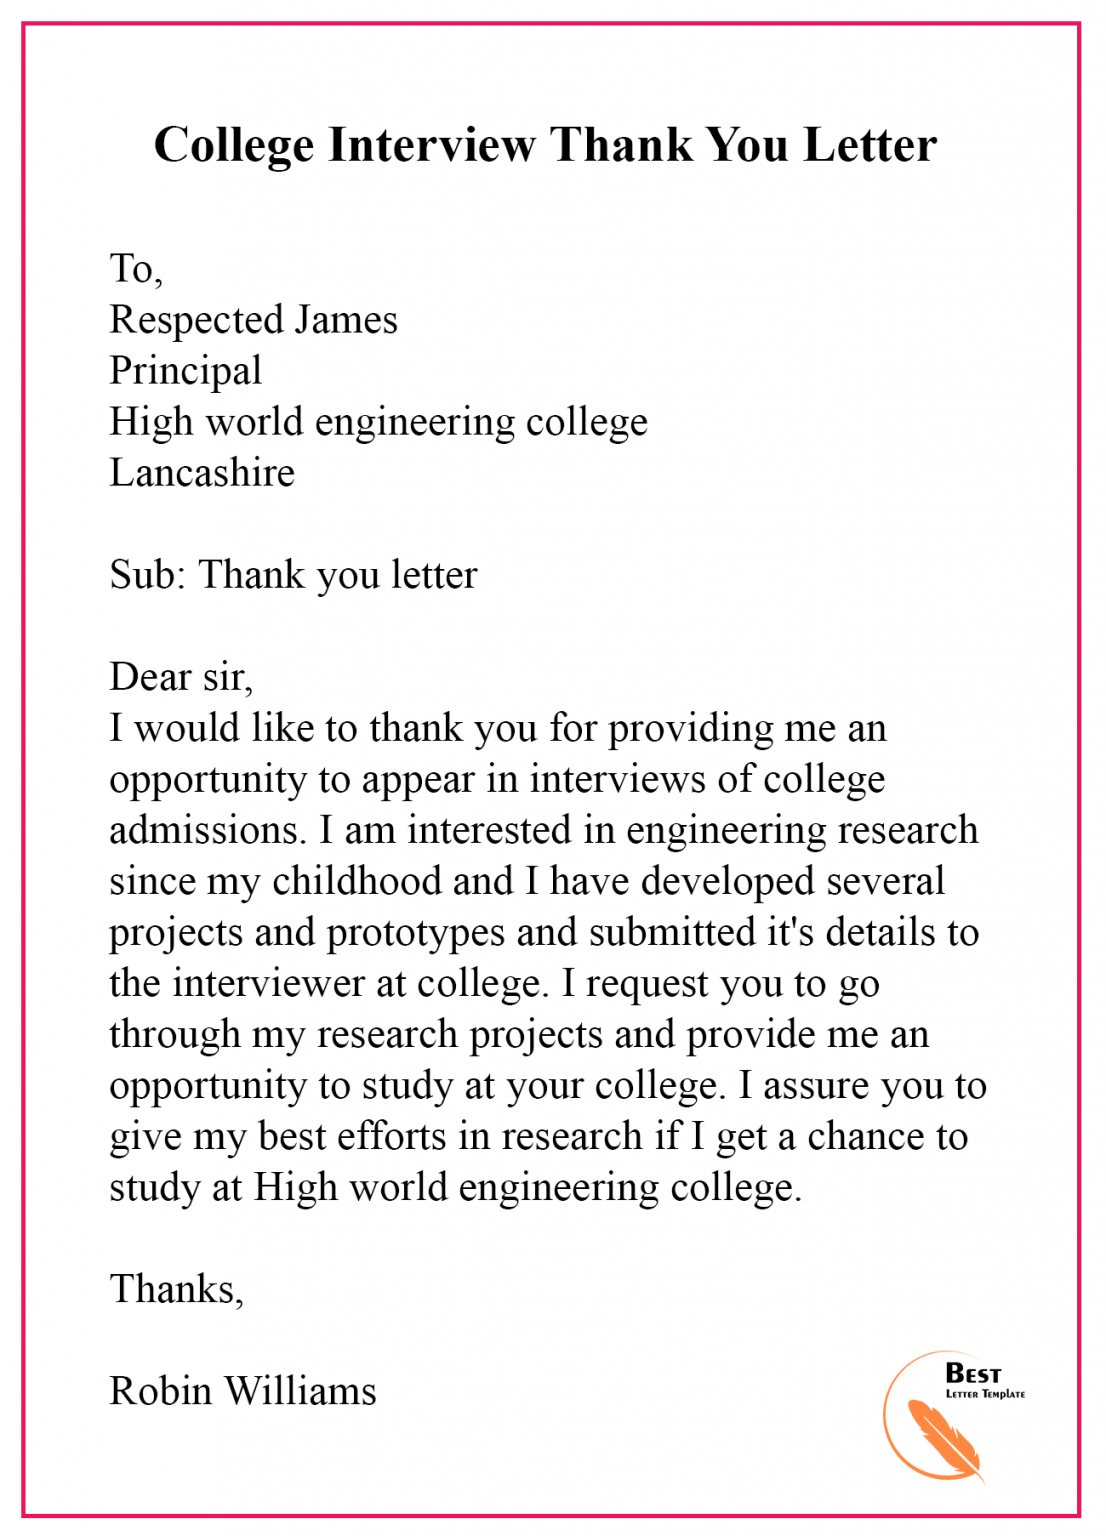 Thank You Letter After Interview - Format, Sample & Example